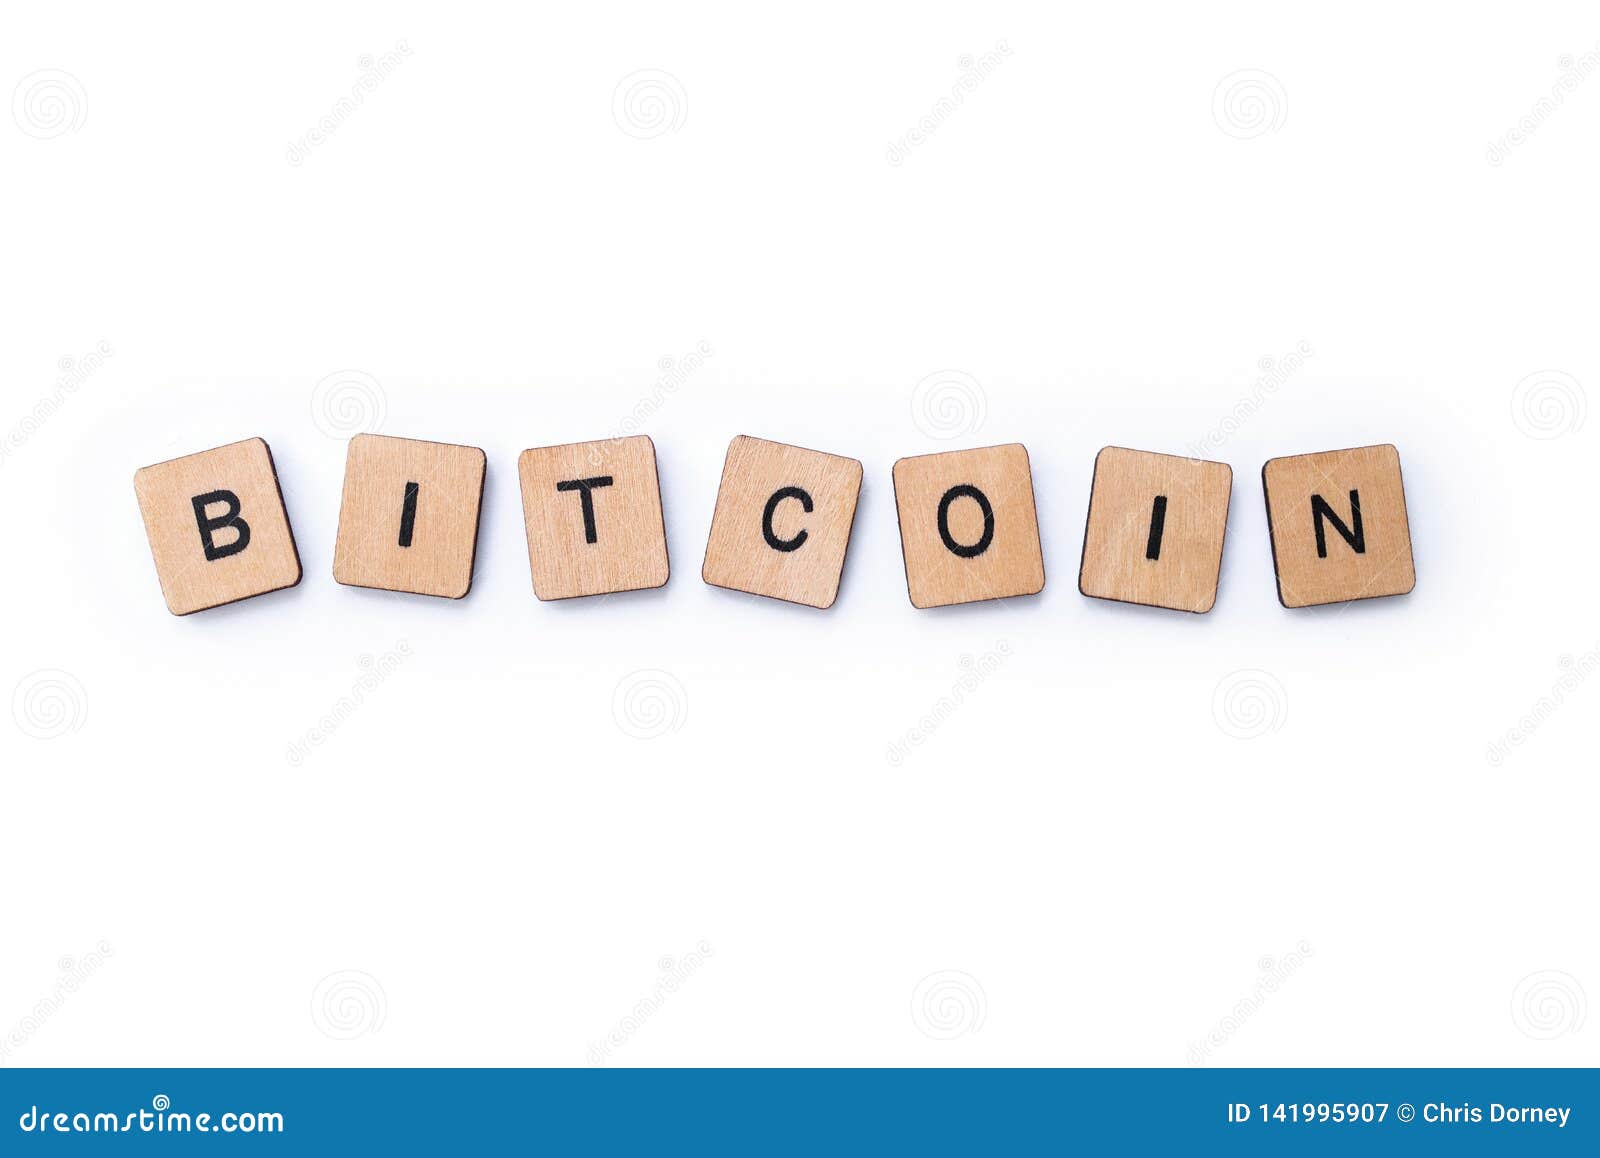 4 pics 1 word bitcoin crypto currency and security clearance